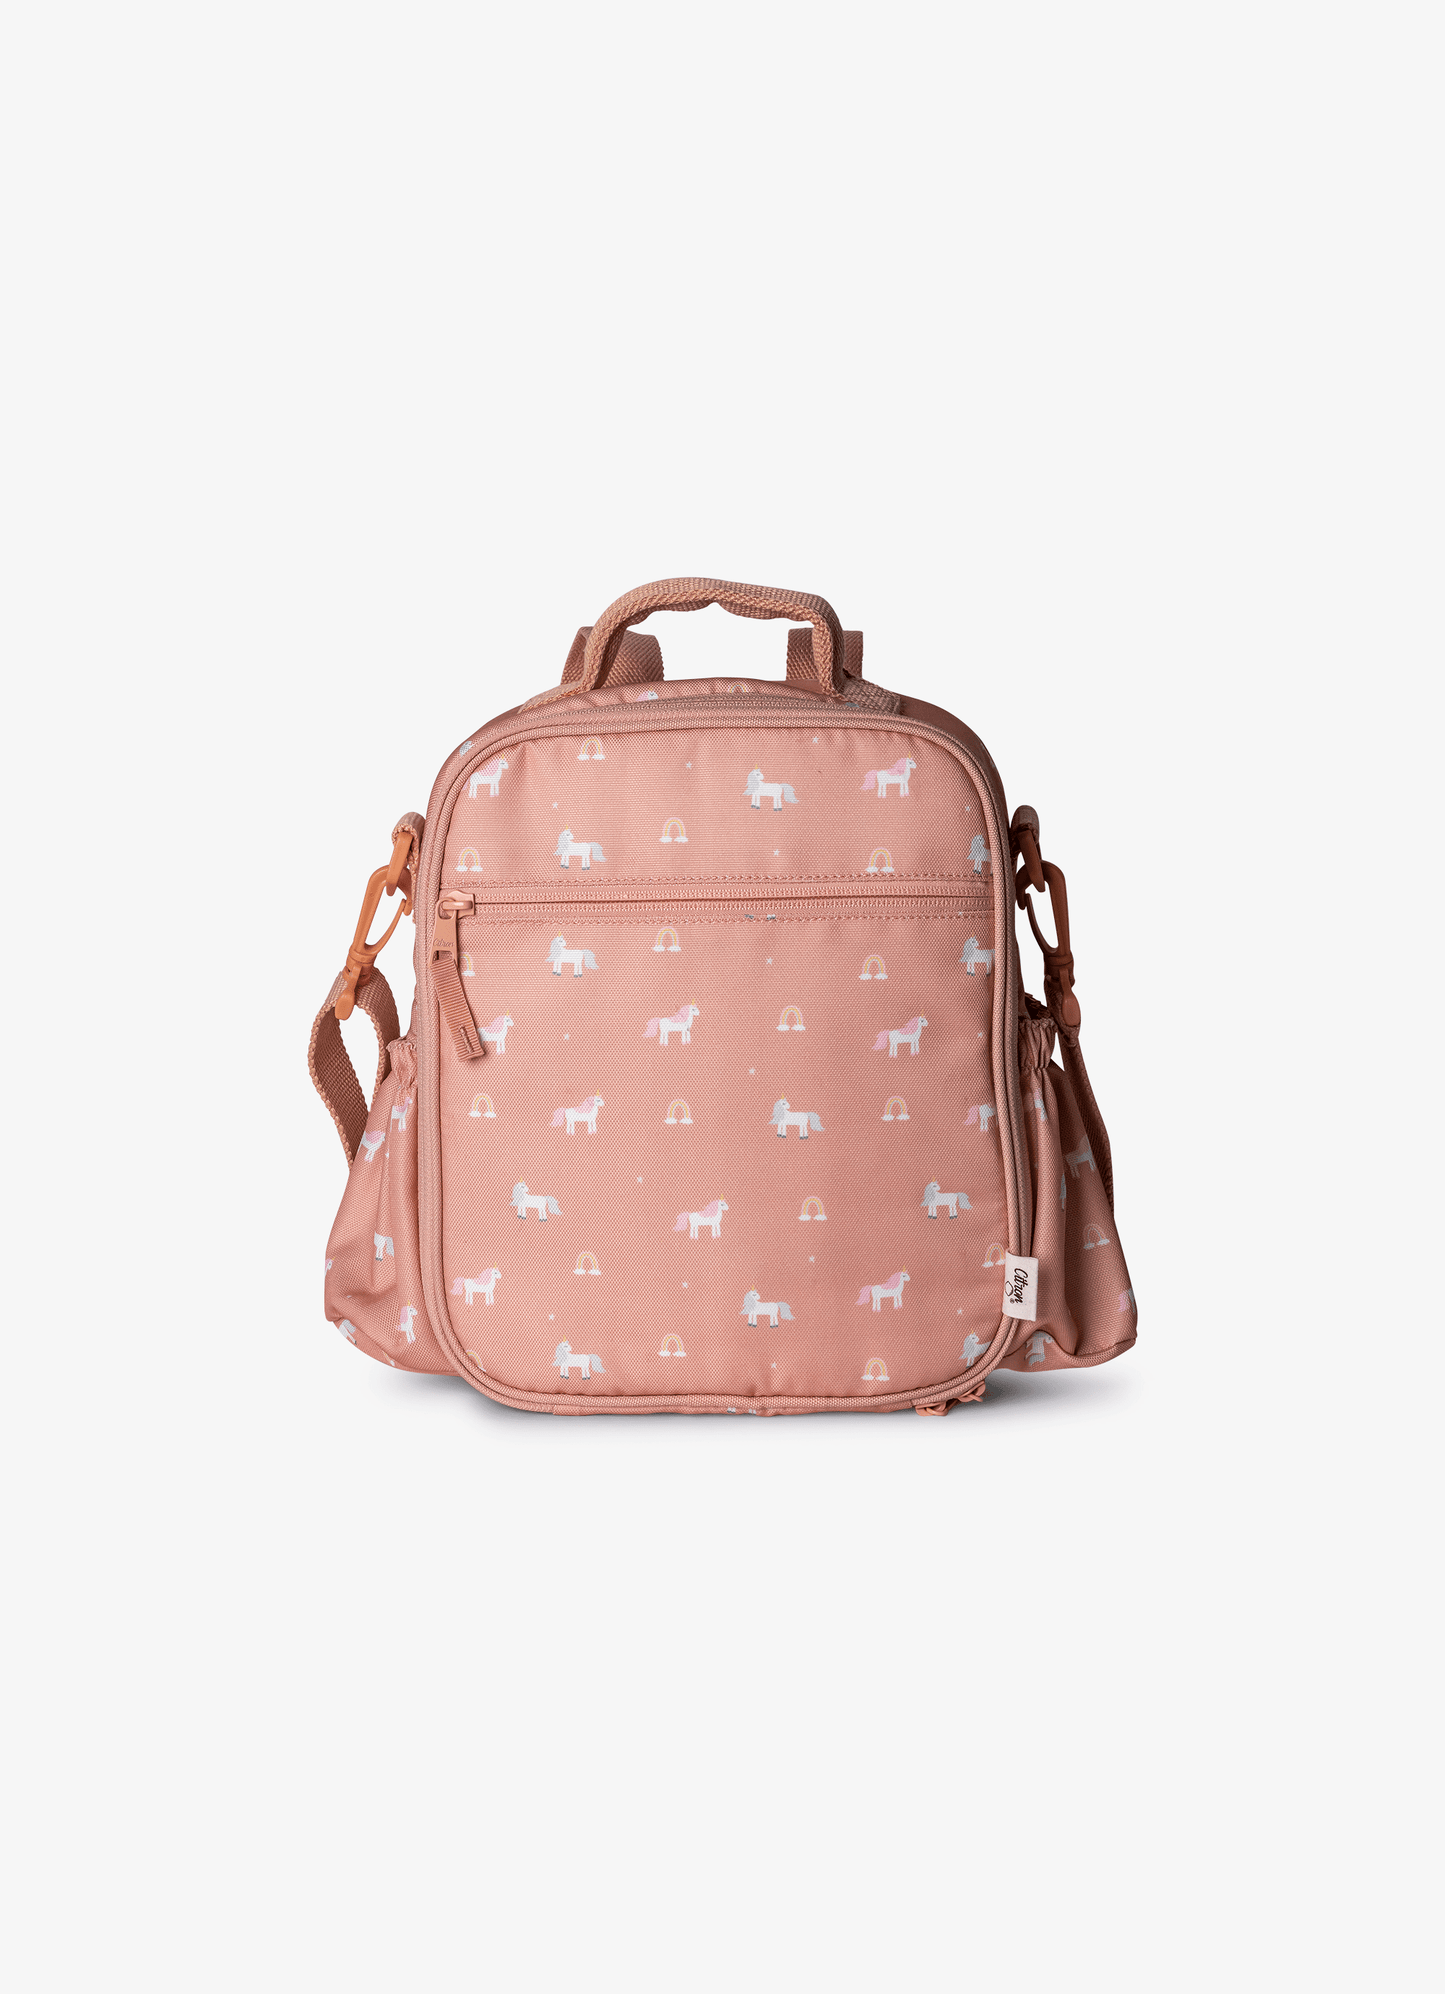 Insulated Lunch Bag Backpack - Unicorn Blush pink